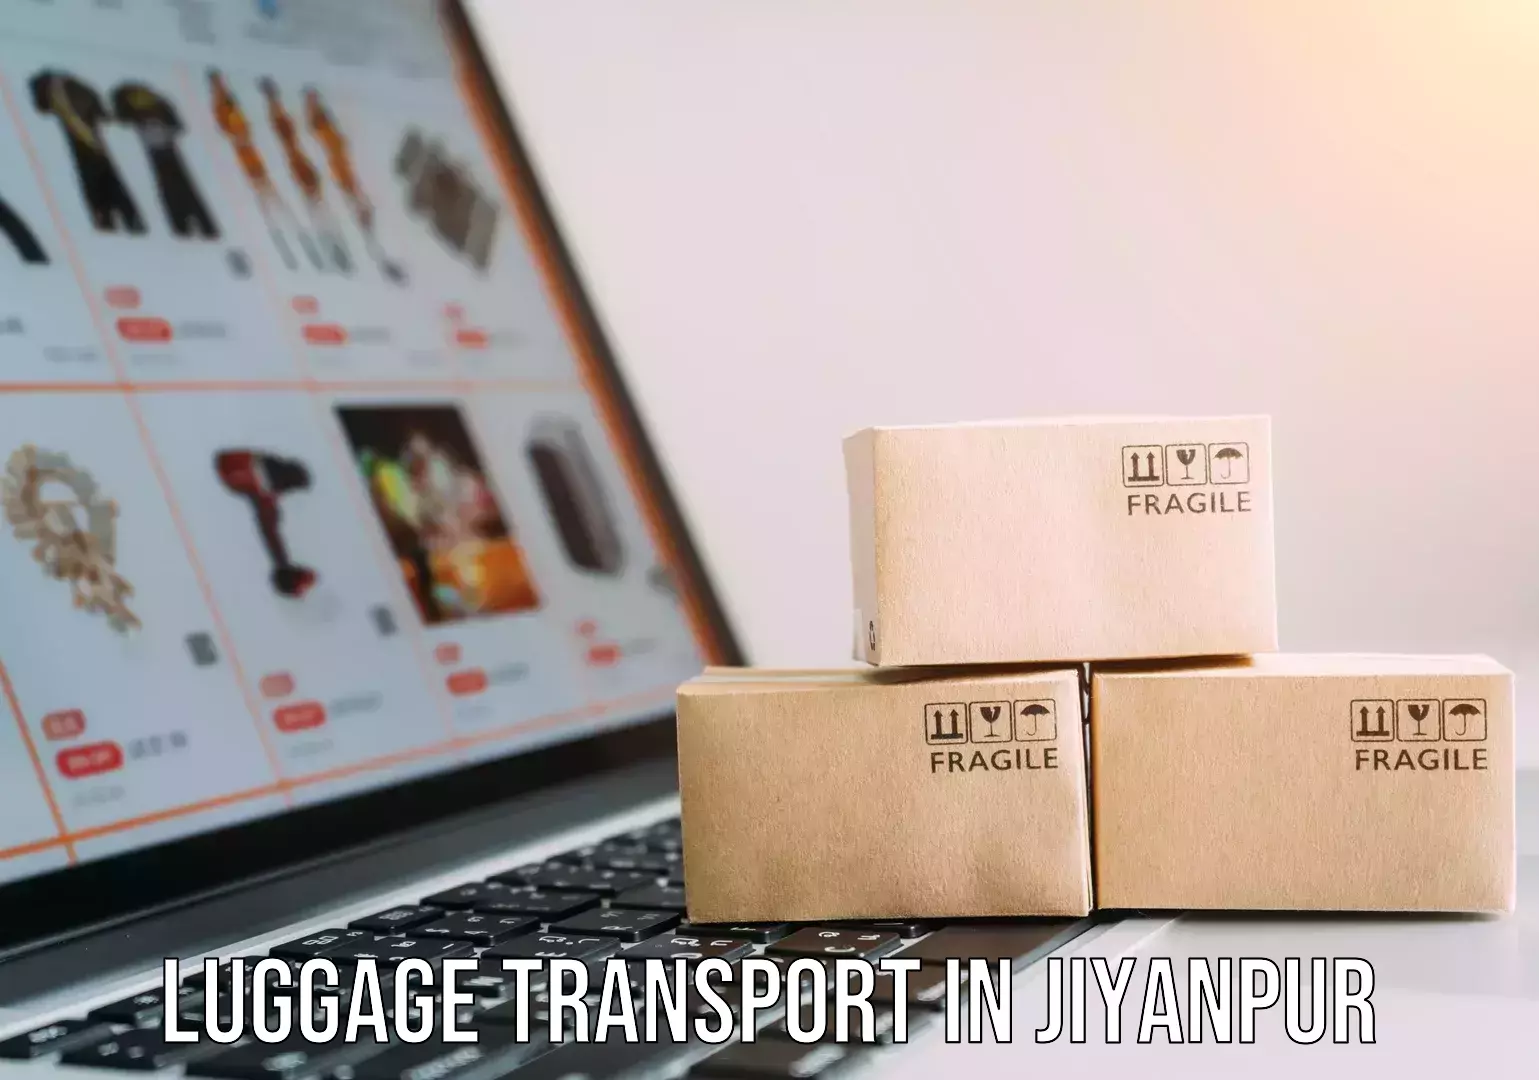 Baggage transport services in Jiyanpur